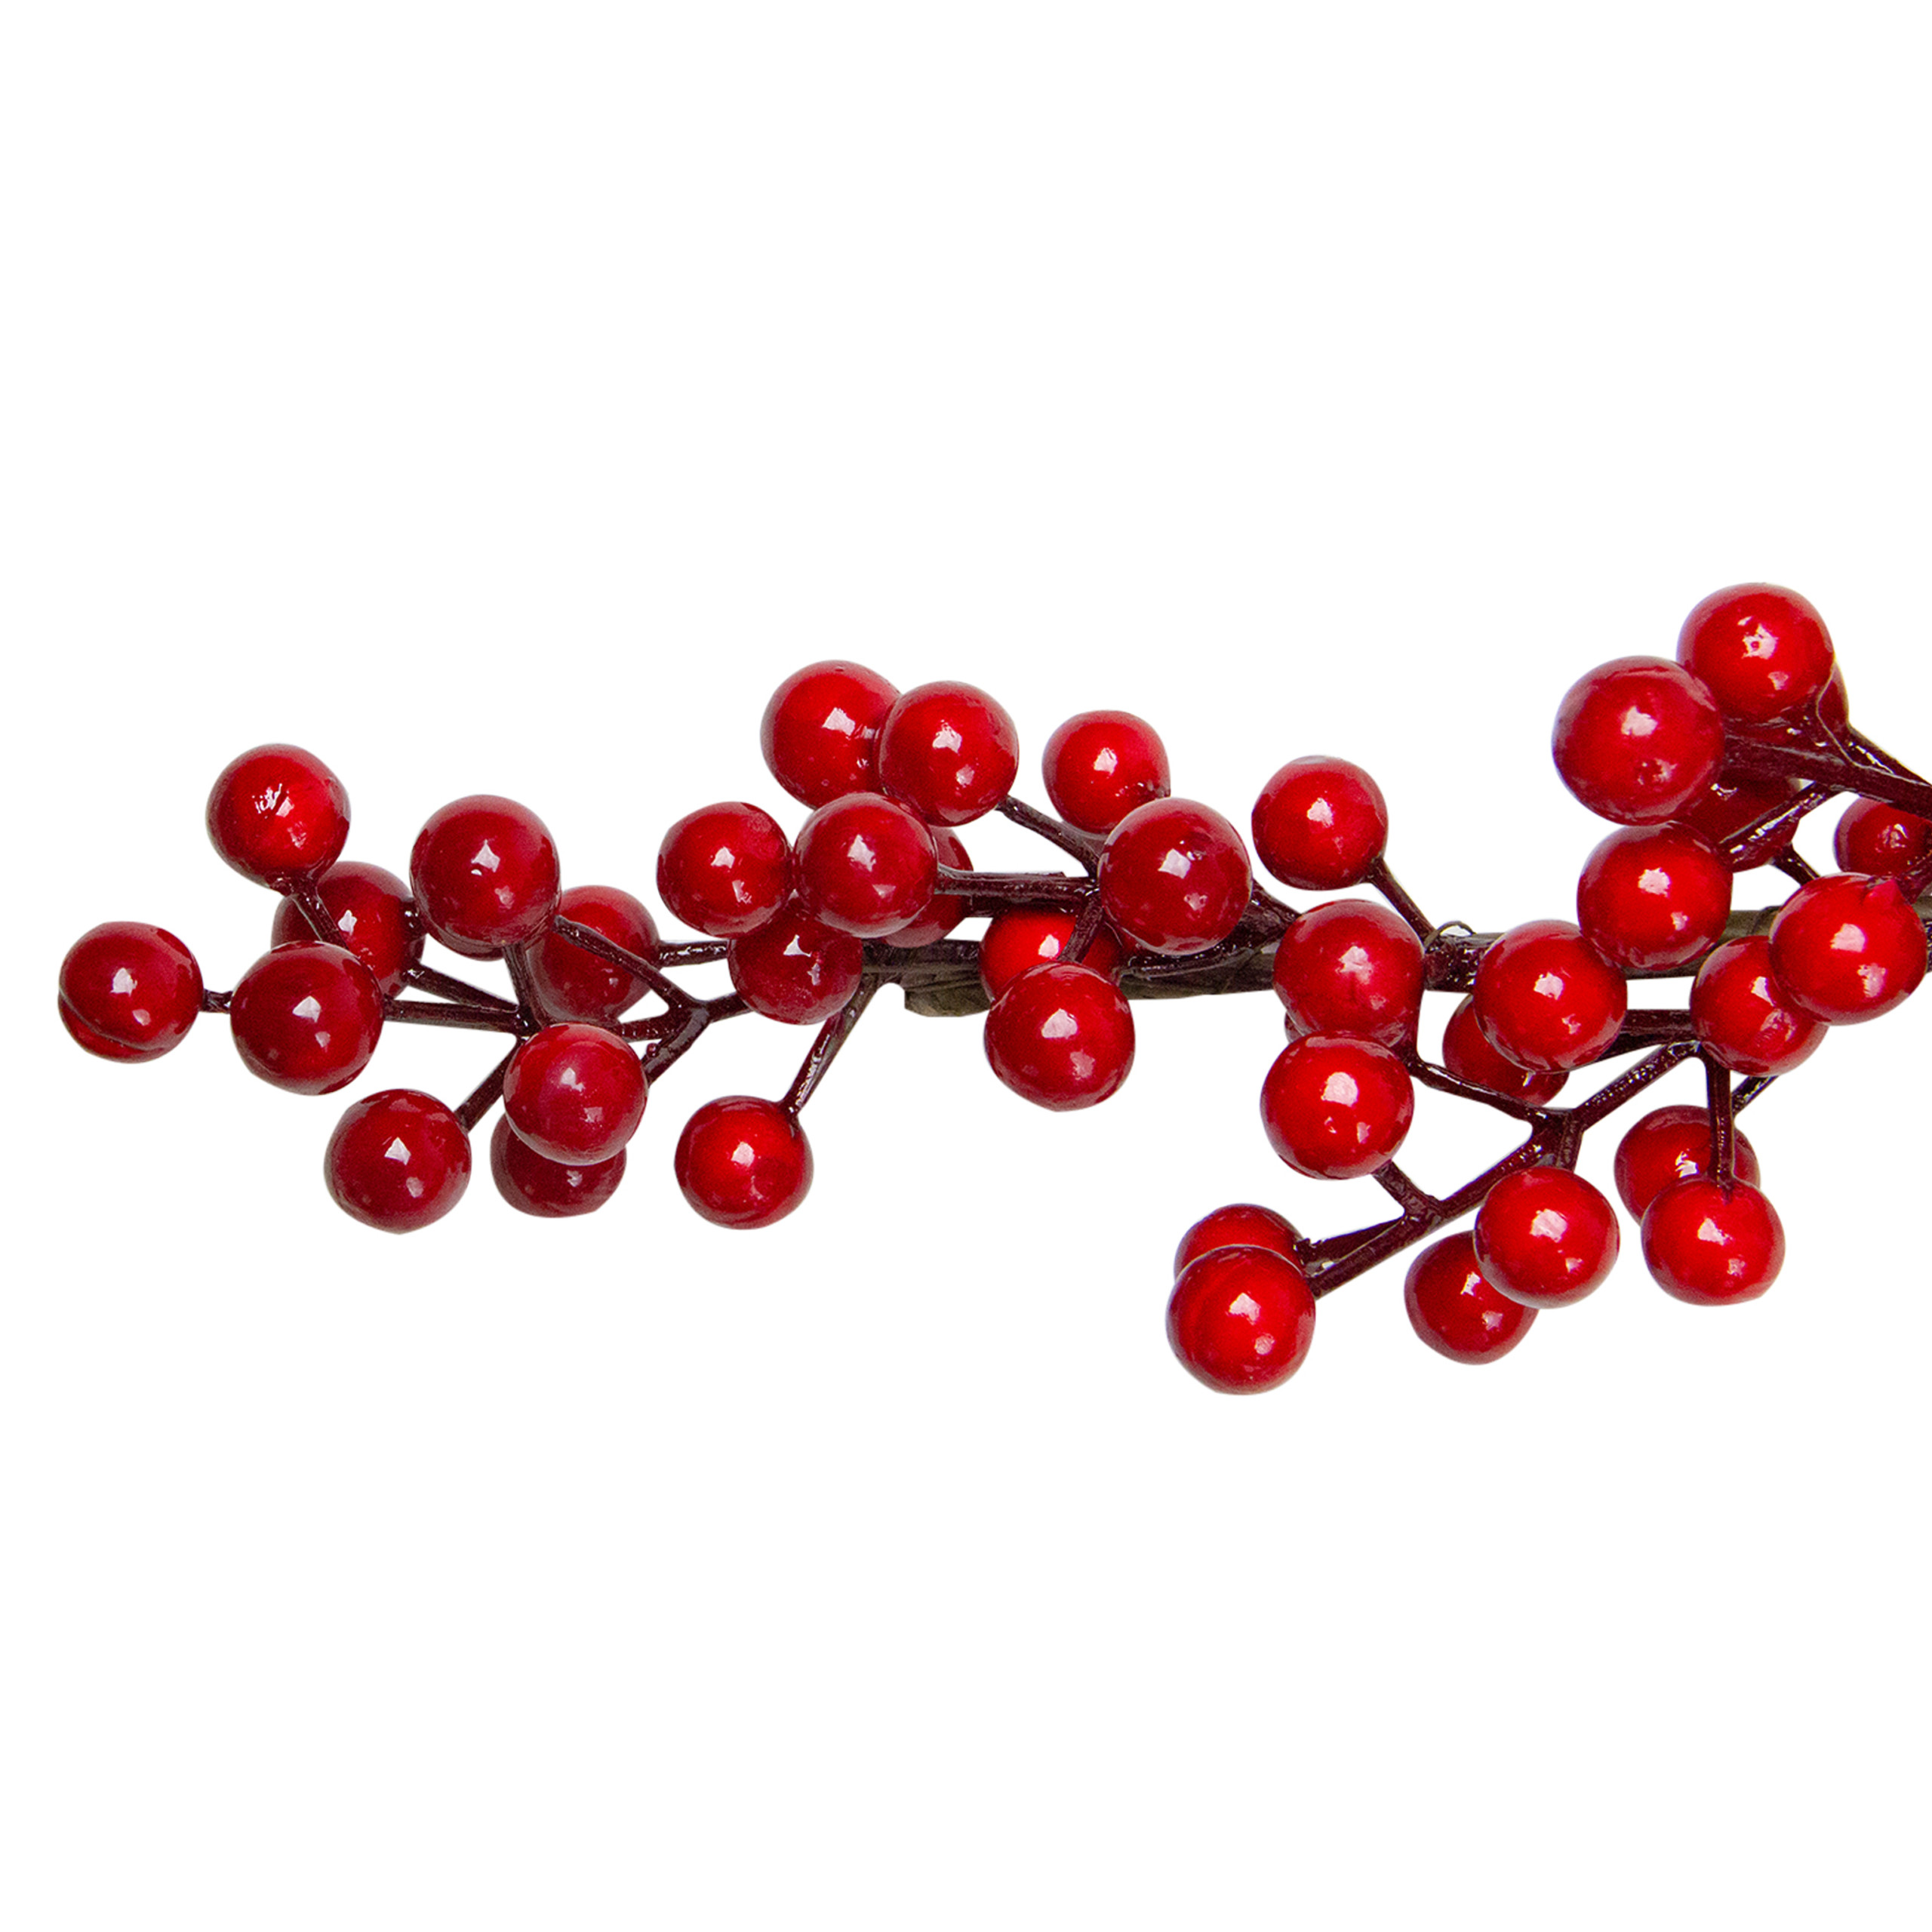 5 Shiny Red Berries Artificial Twig Christmas Garland Unlit Christmas Central